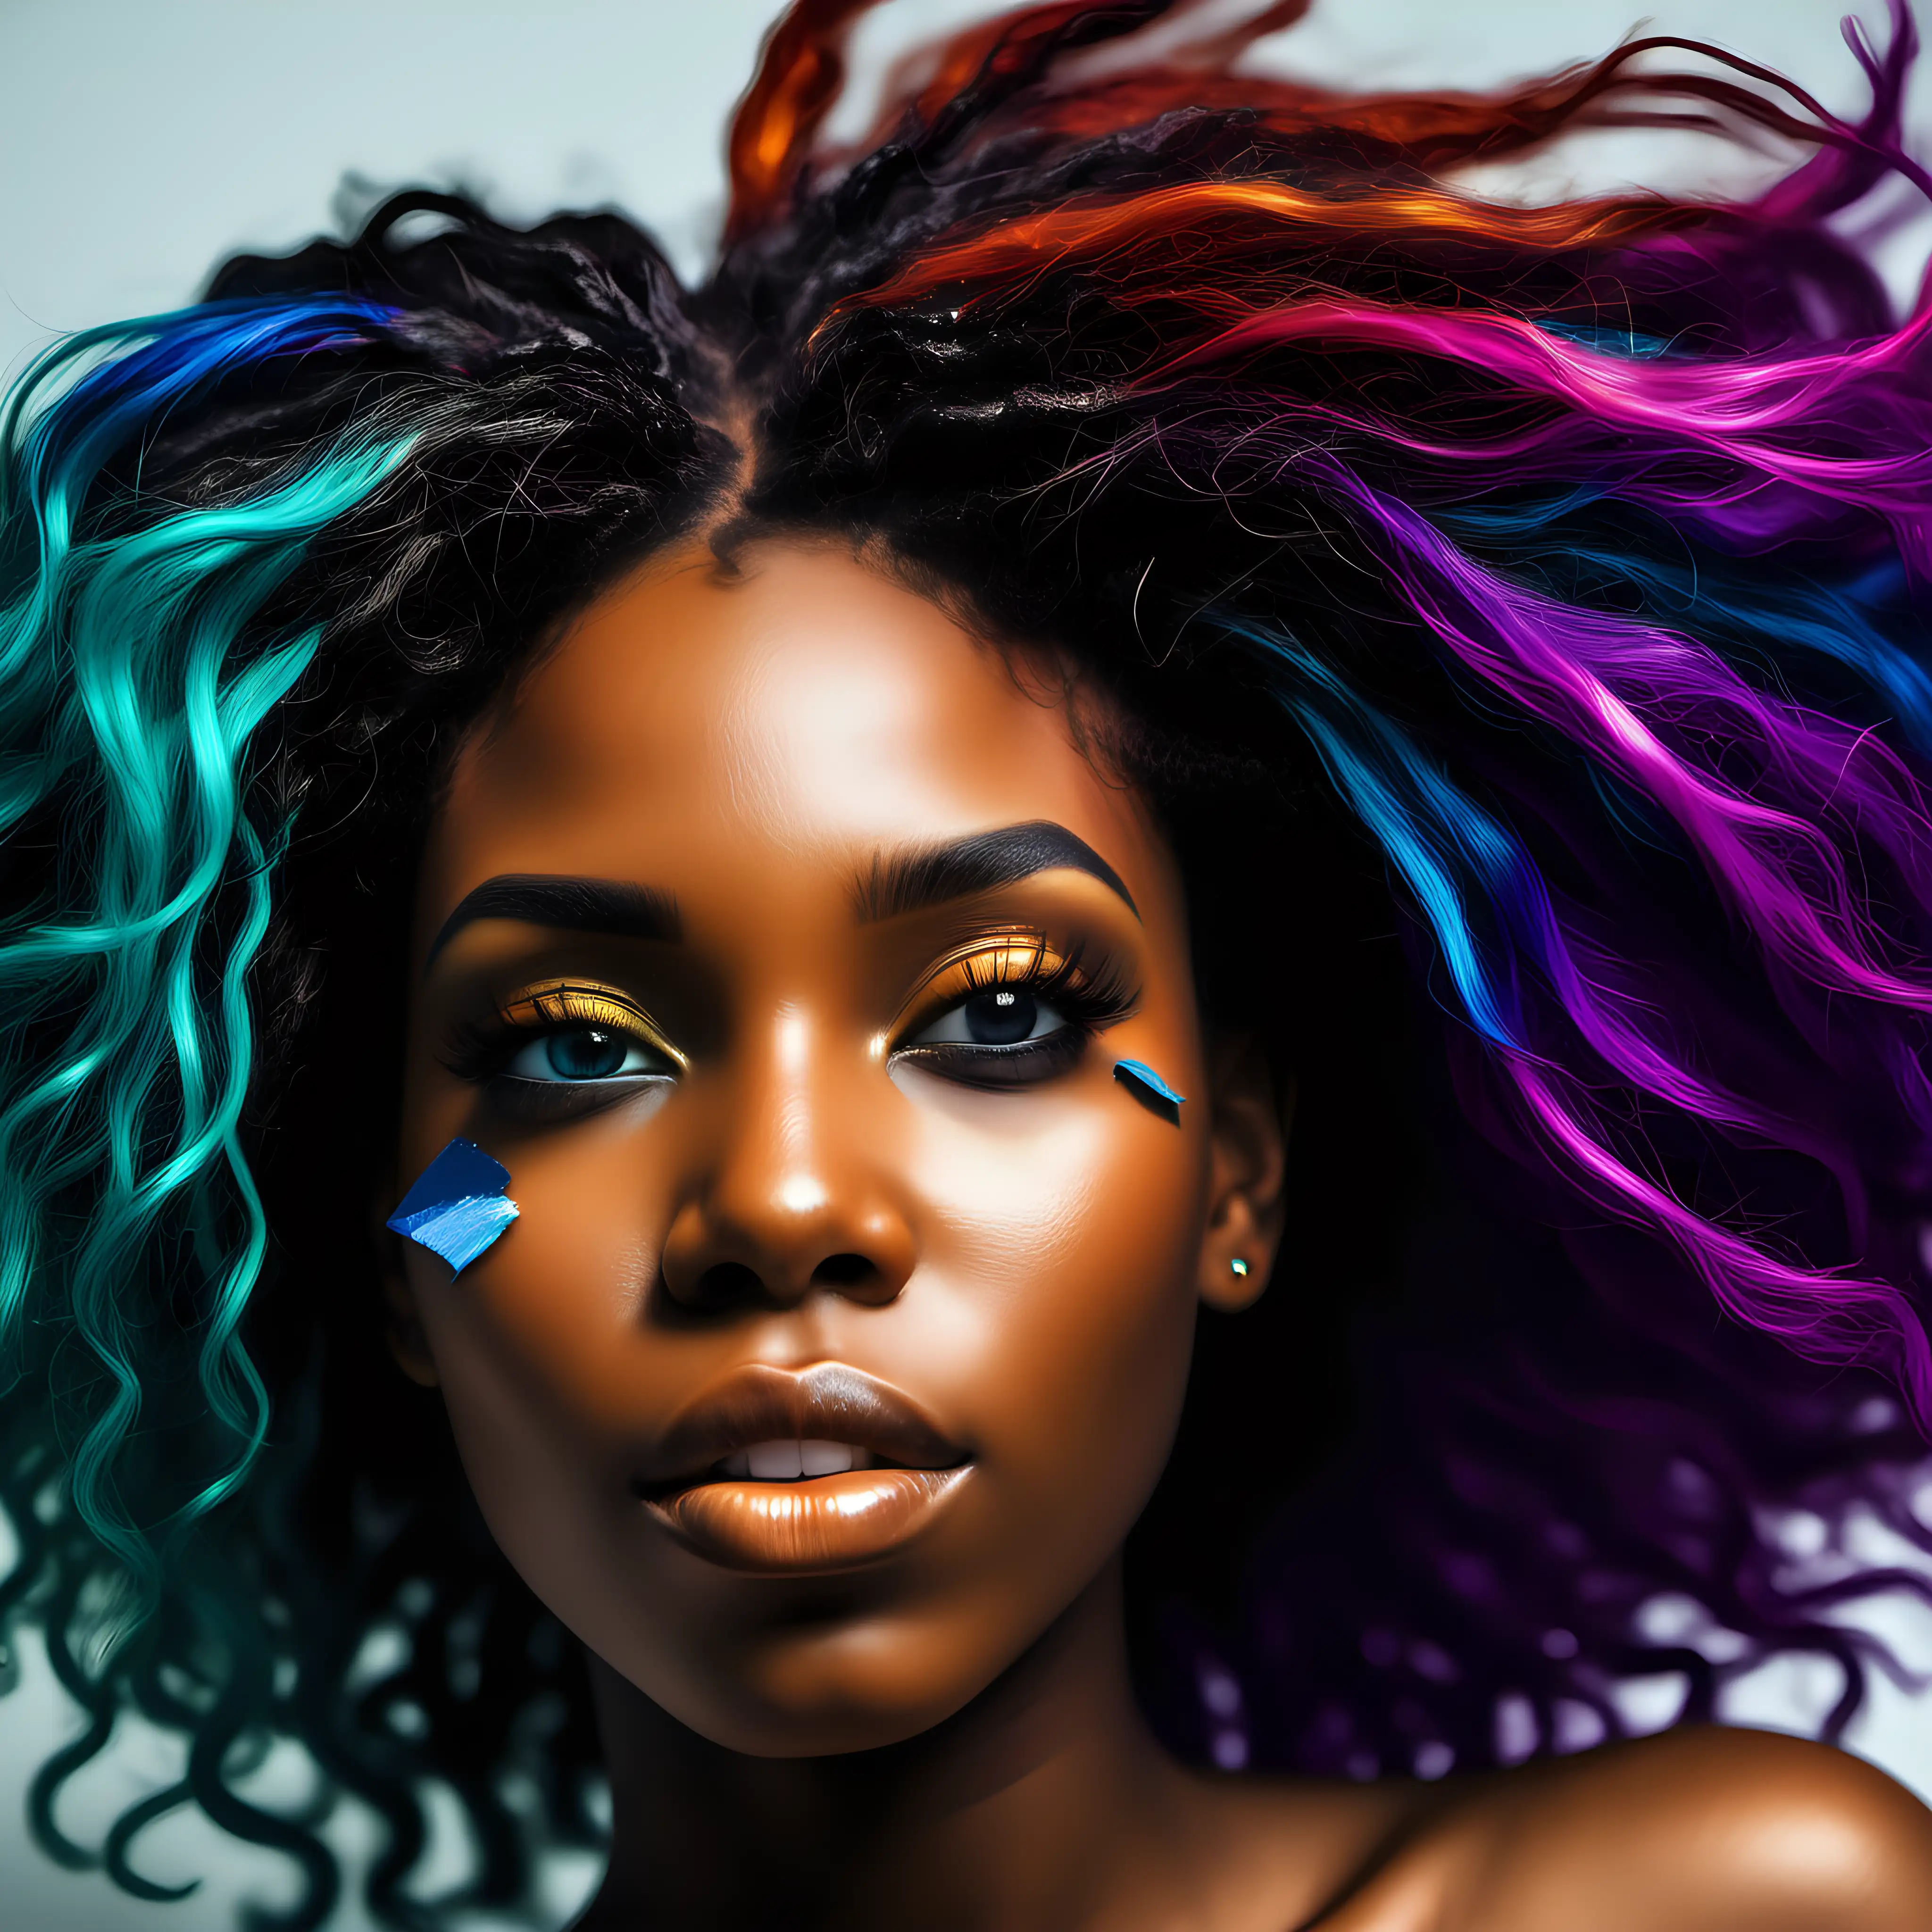 Vibrant Black Women with Colorful Hair Amidst Shattered Dreams